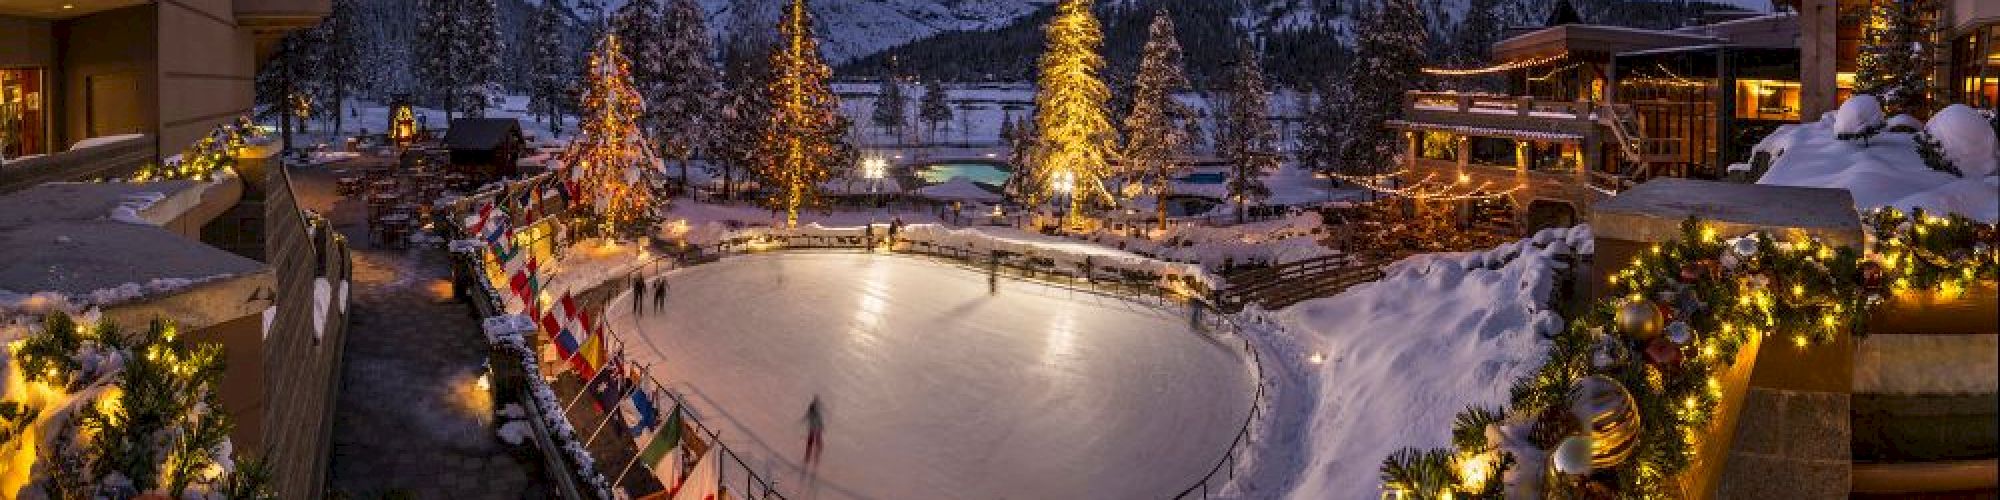 This image shows a festive ice skating rink surrounded by decorated trees and buildings, set in a snowy mountain landscape during dusk.